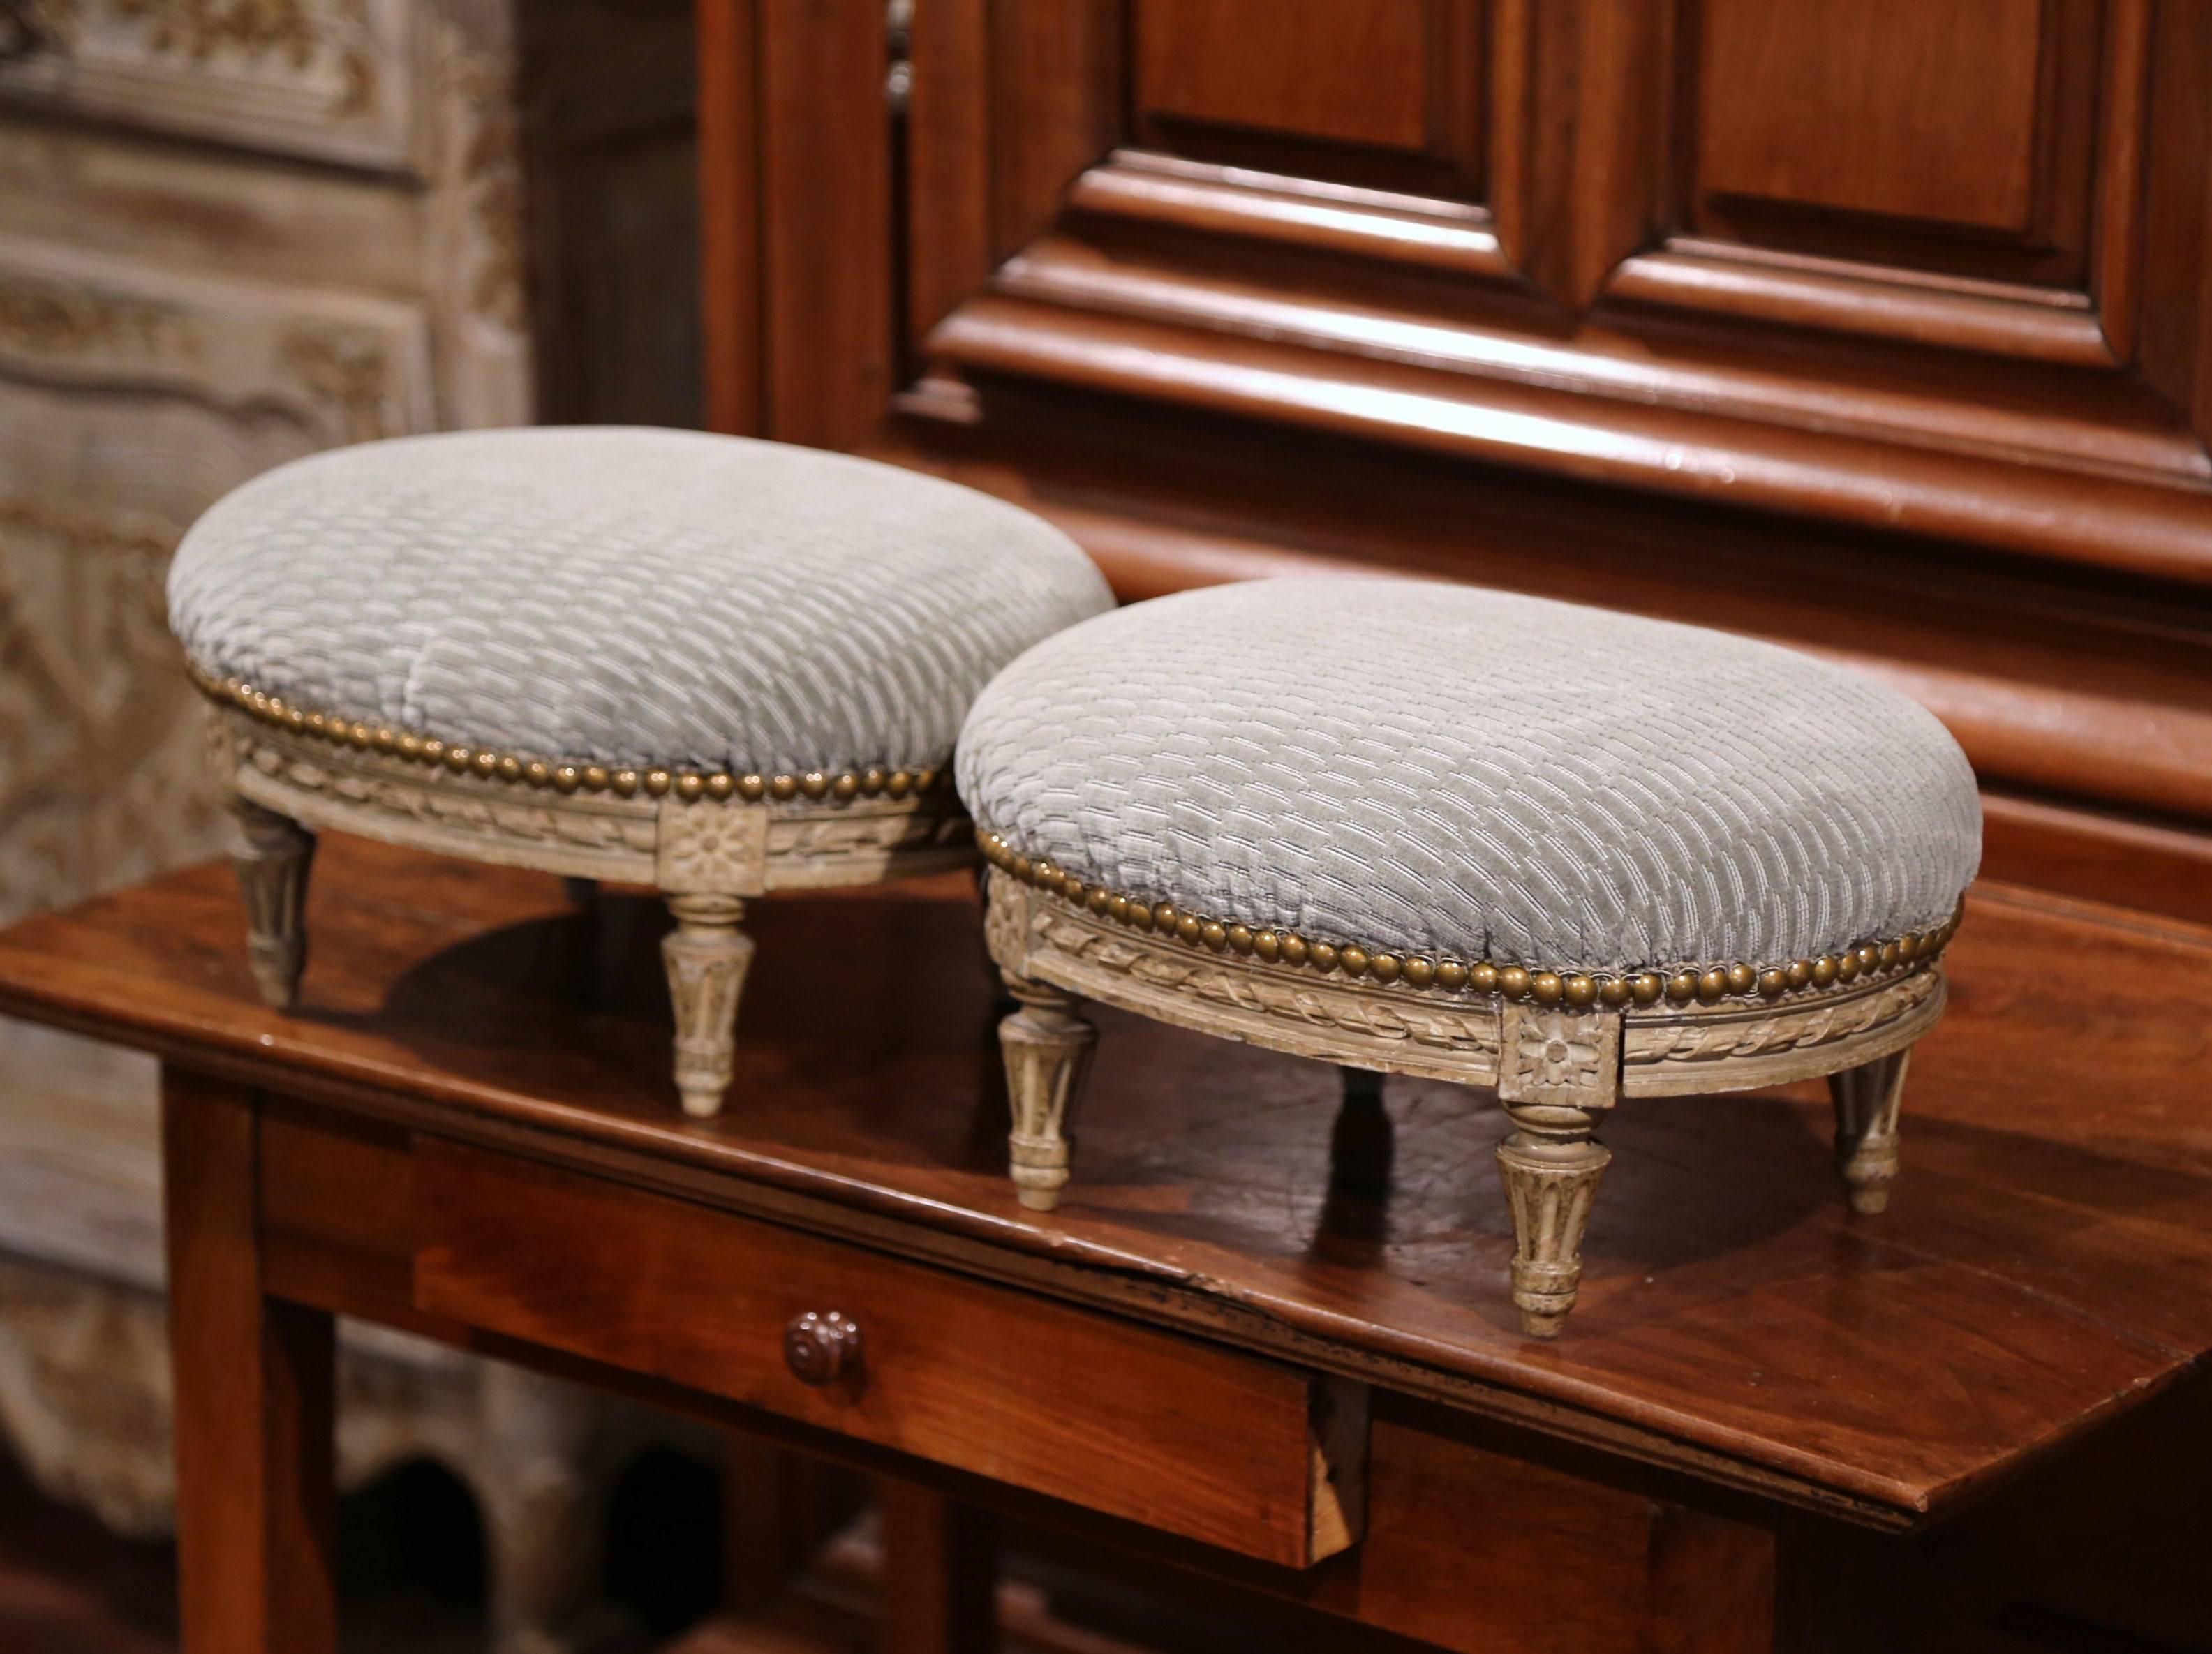 Elegant pair of antique footstools from Paris, France; crafted circa 1870, each oval stool features wonderful carving including carved medallions and tapered legs. They have the original painted finish and have been reupholstered with a blue velvet